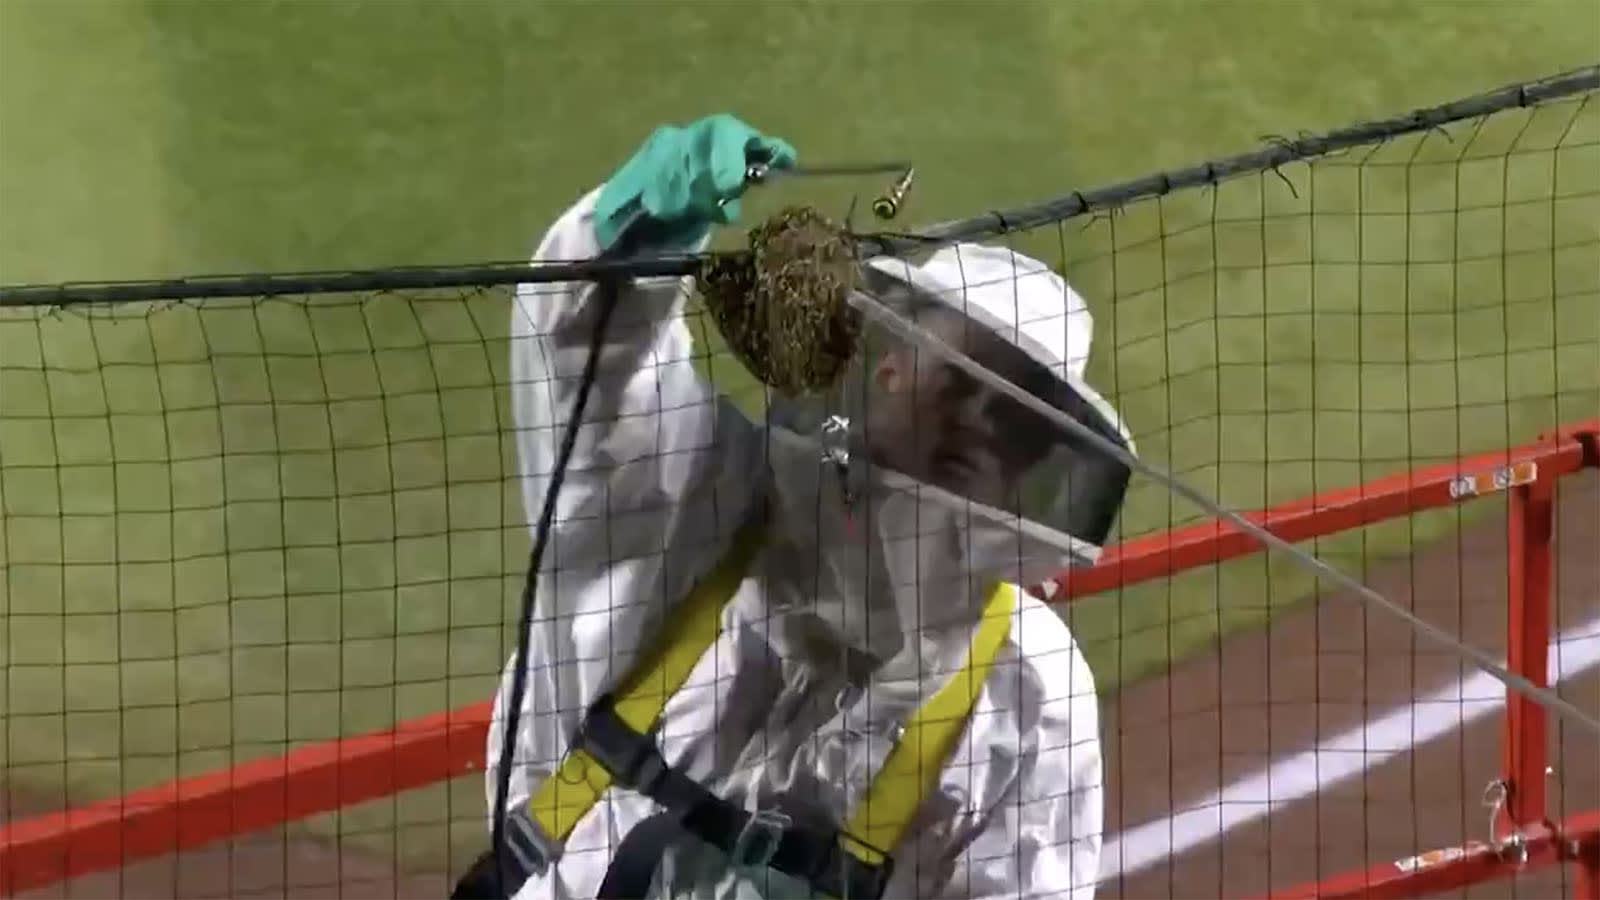 A beekeeper takes care of a colony behind home plate